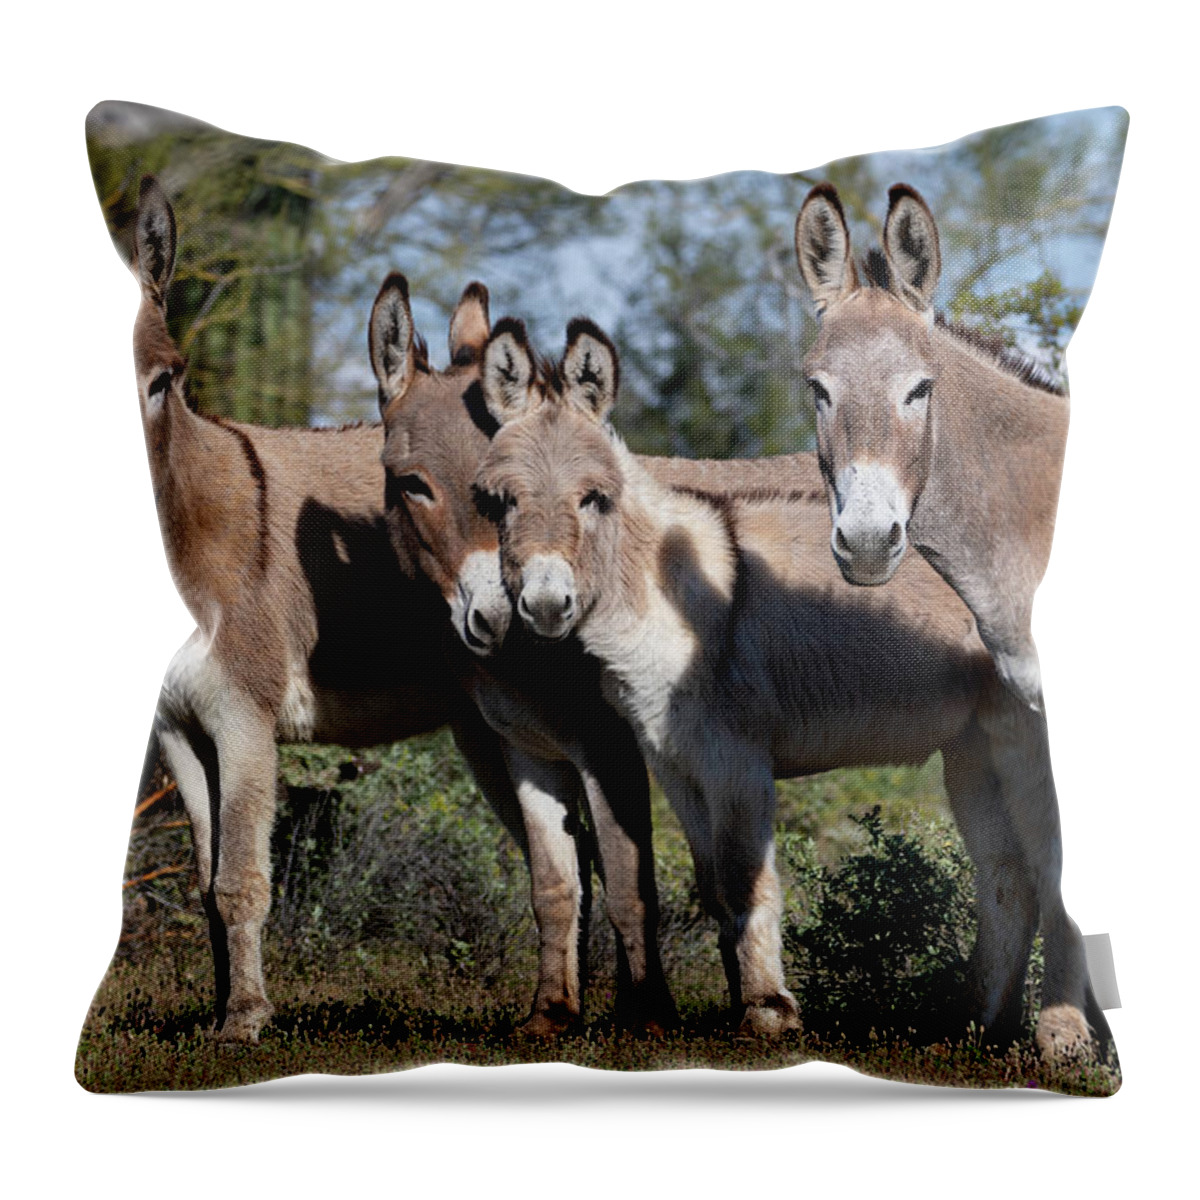 Wild Burros Throw Pillow featuring the photograph Family by Mary Hone